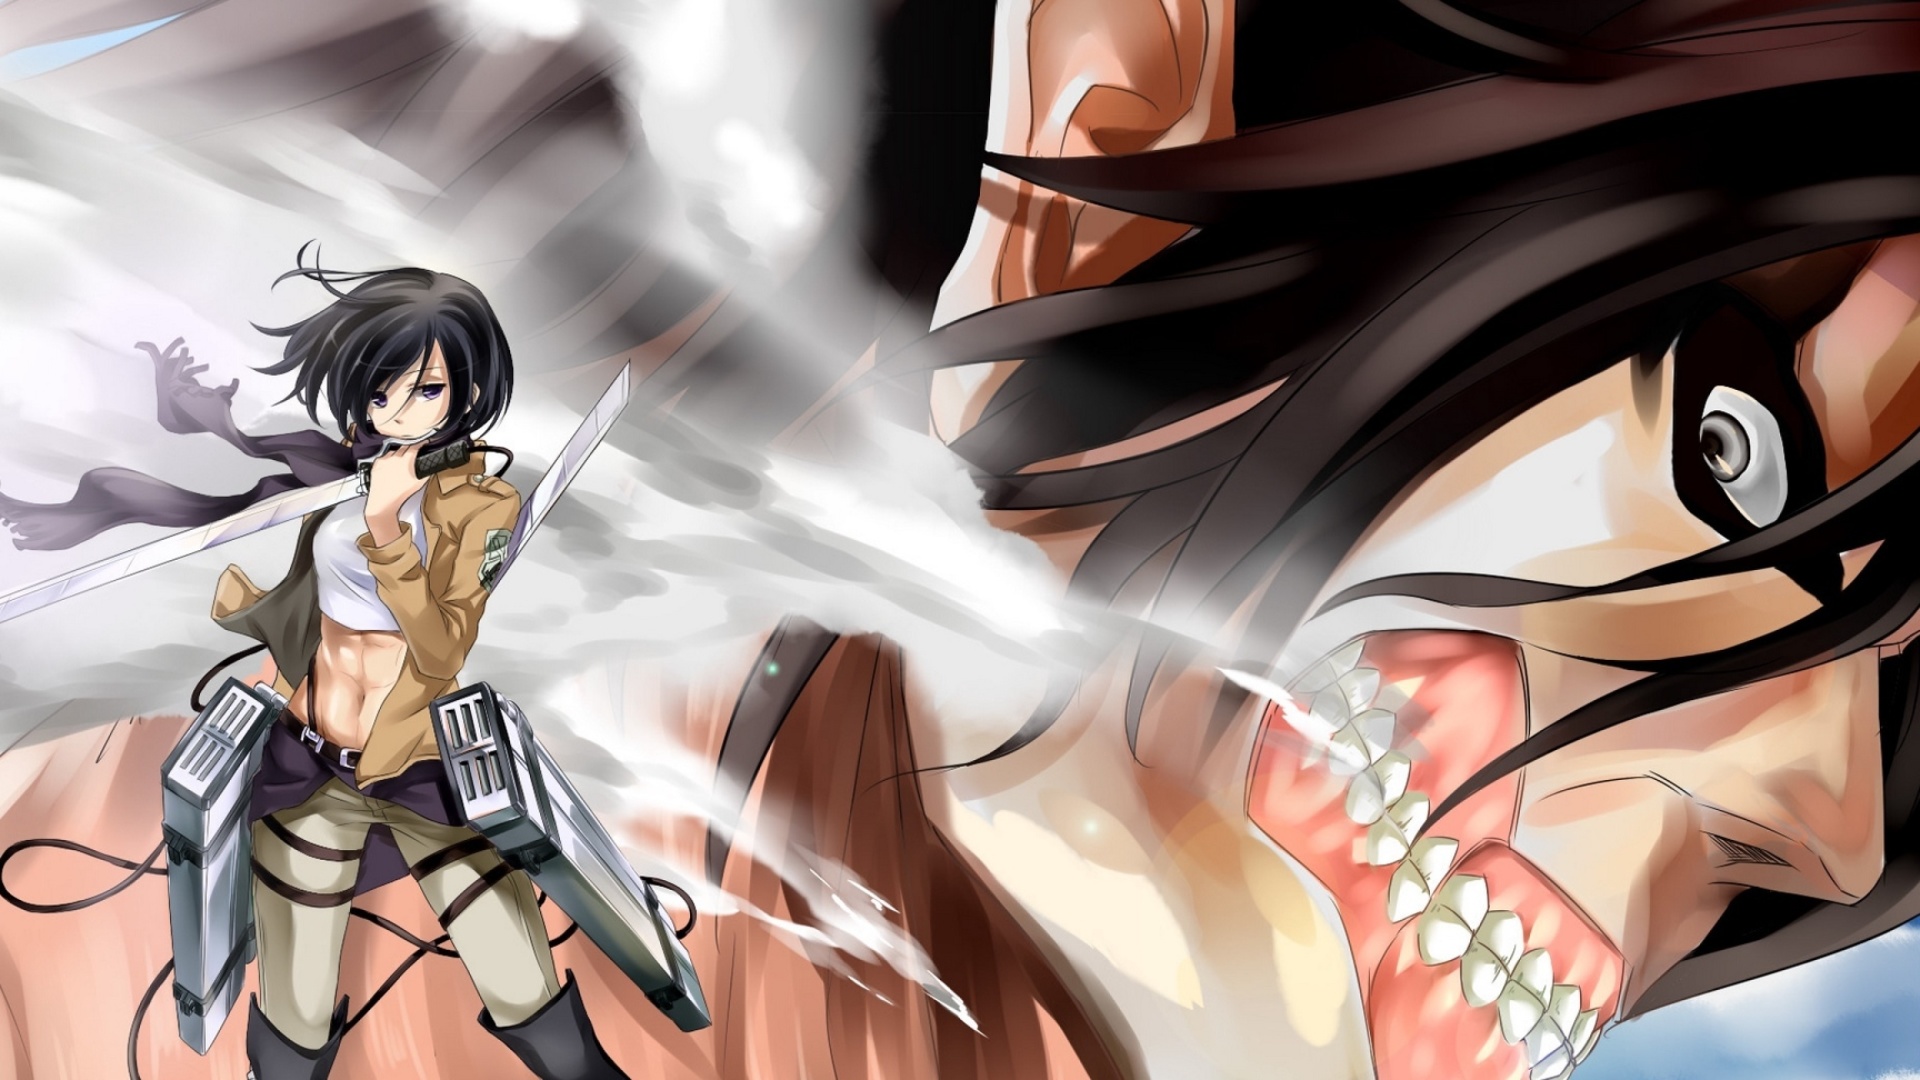 Attack on Titan with Eren and Mikasa wallpaper 1920x1080